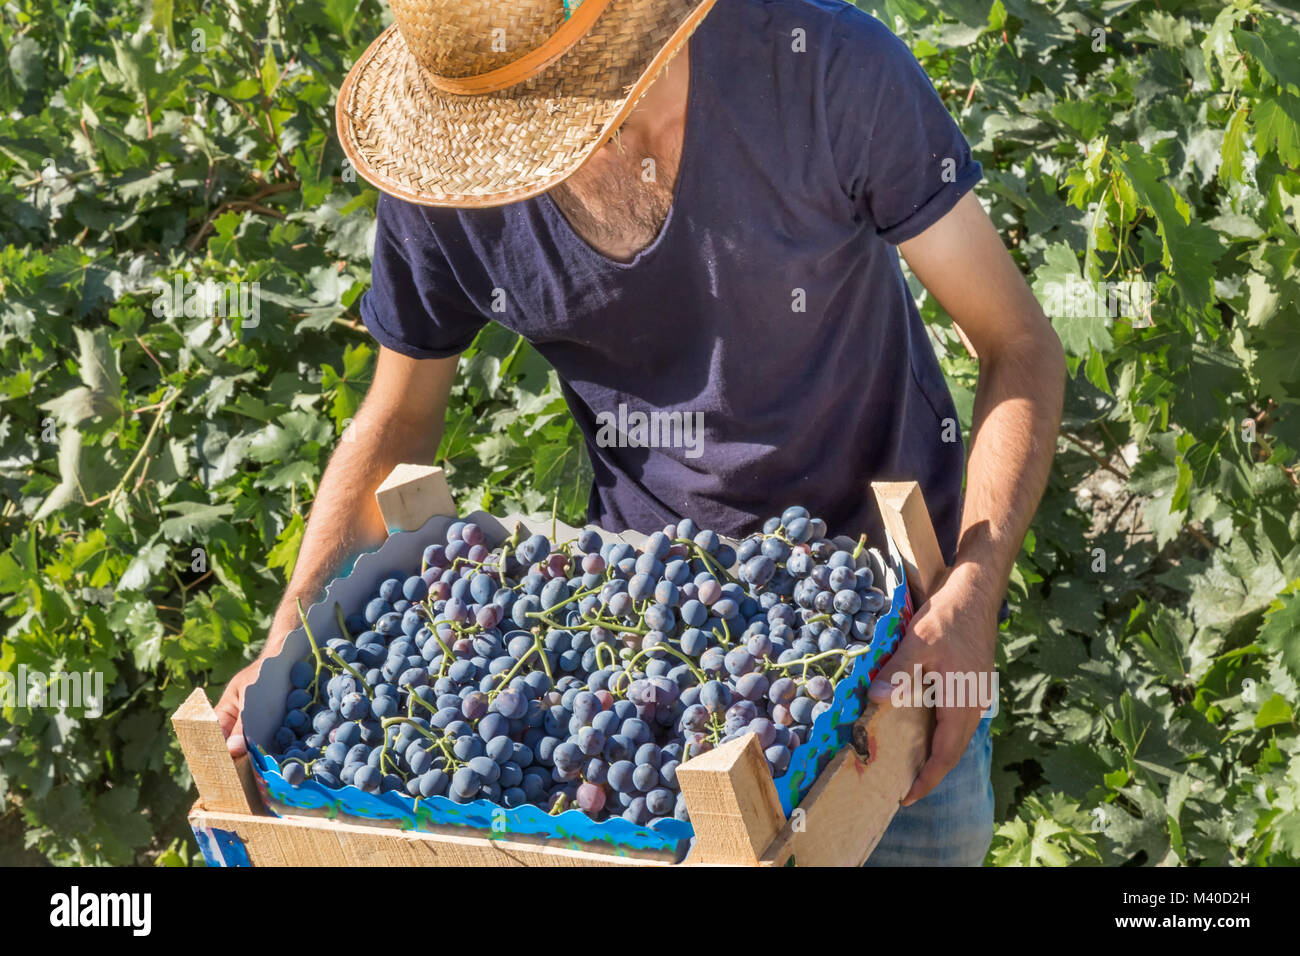 Unidentified man holds crate of grapes at harvesting in the vineyard. Stock Photo